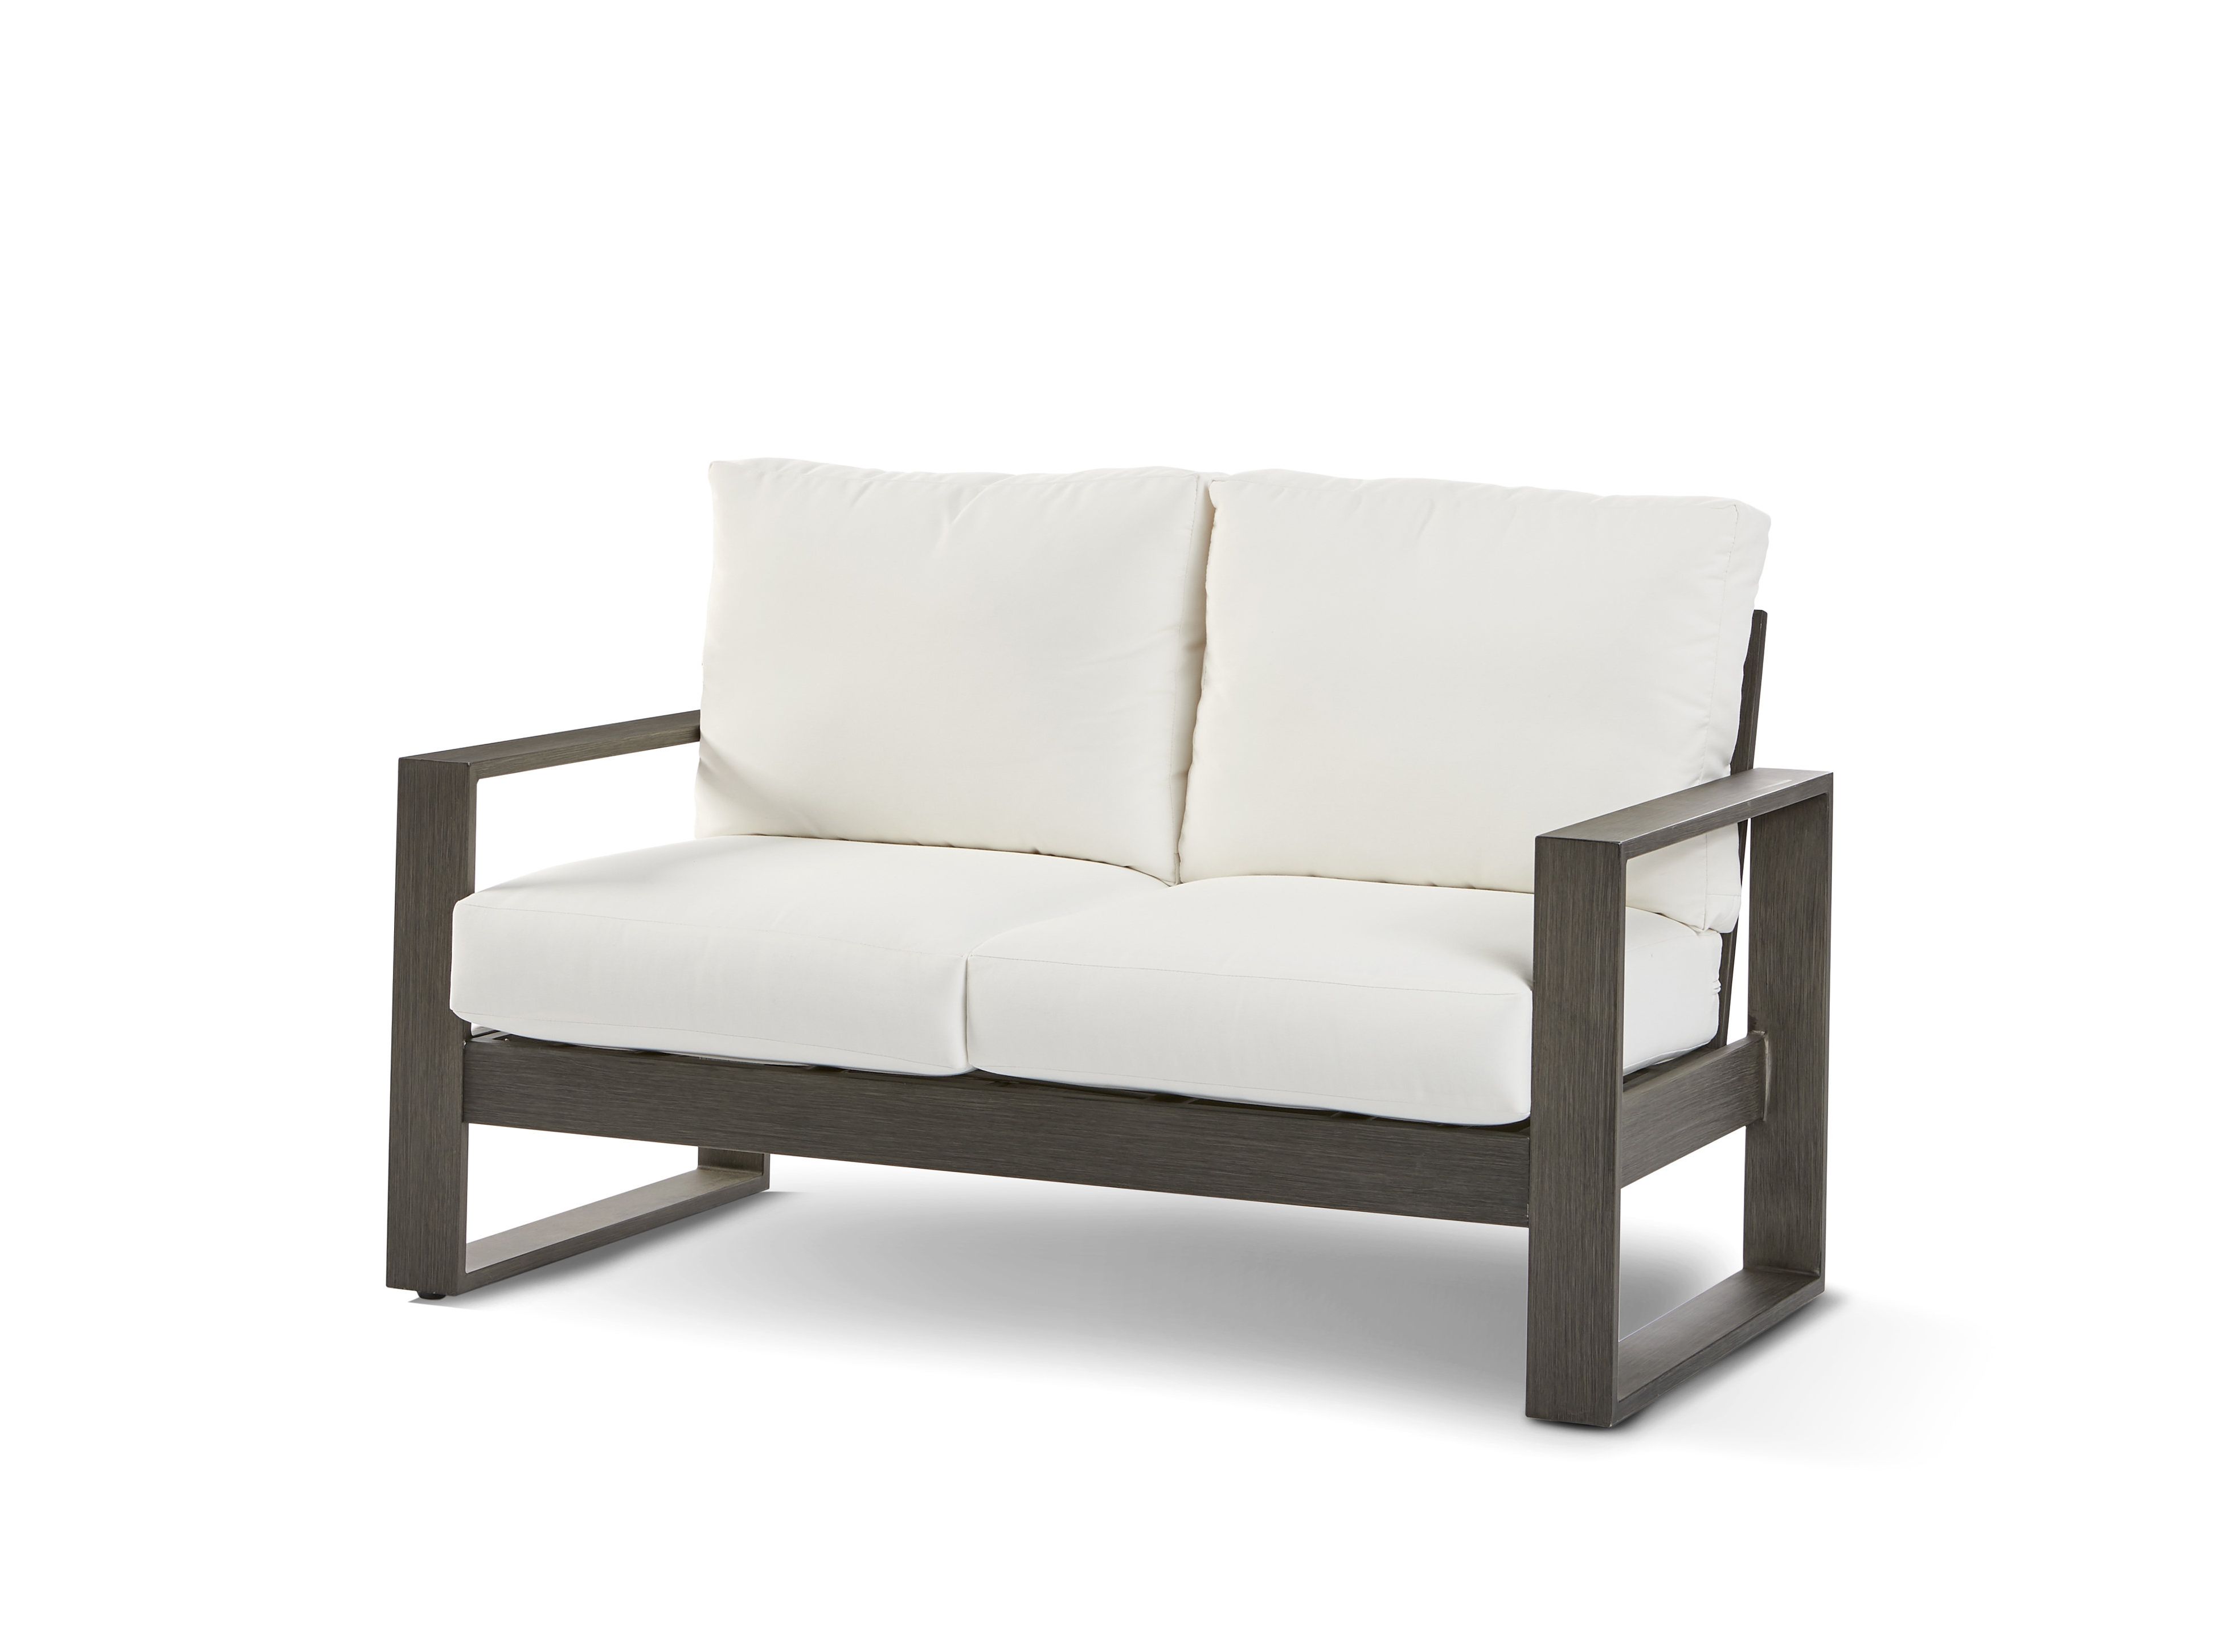 Most Recently Released Lyall Loveseats With Cushion With Regard To Sheppard Patio Loveseat With Cushion (View 17 of 20)